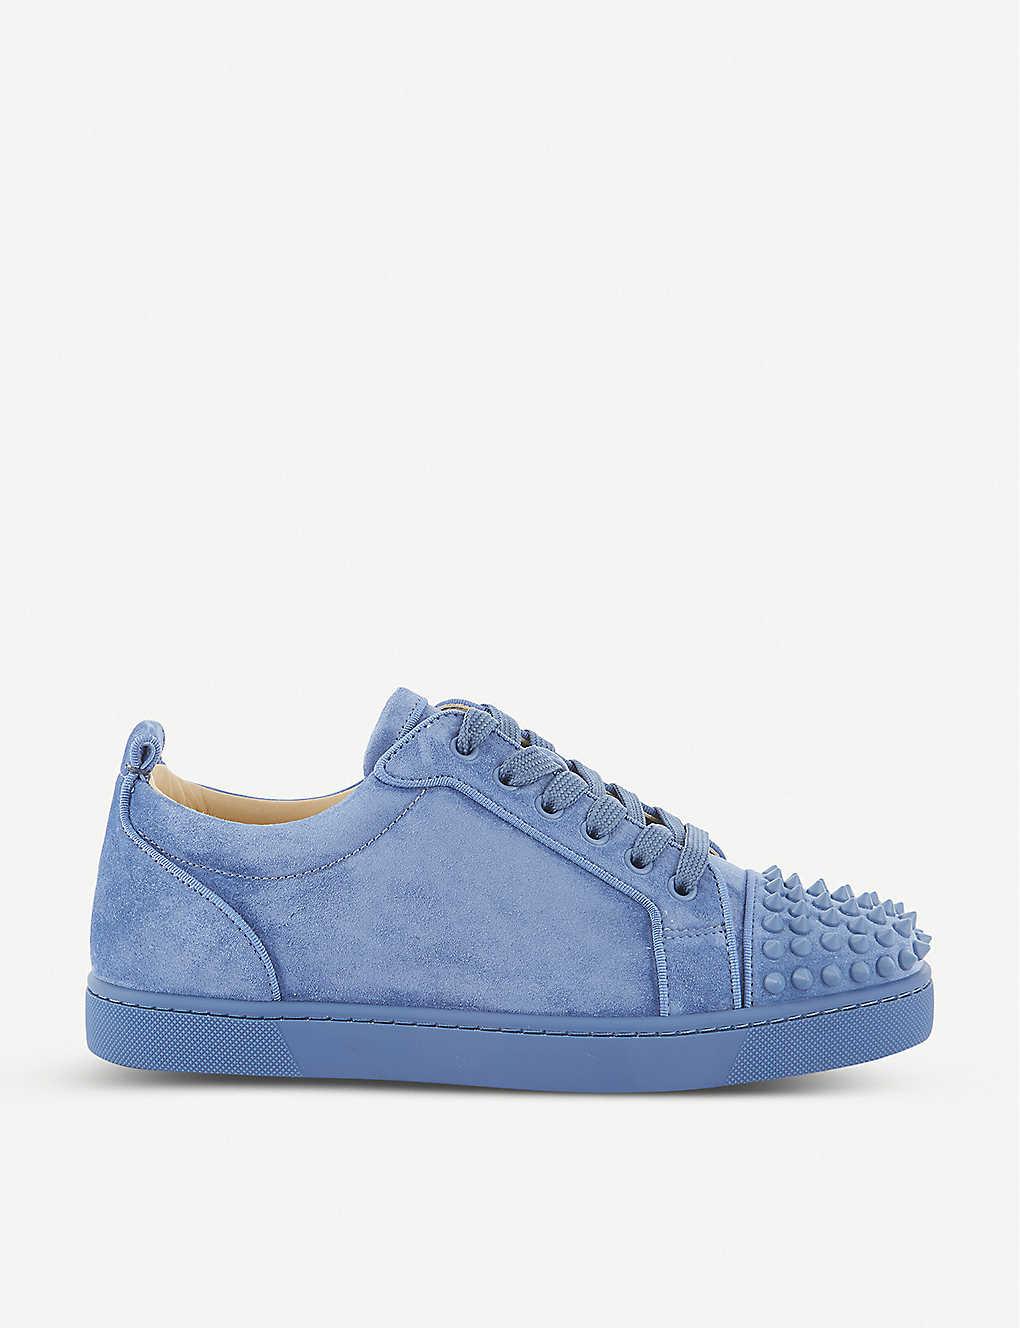 Christian Louboutin Suede Louis Junior Spikes Orlato Flat Veau Vel in Blue for Men - Save 21% - Lyst